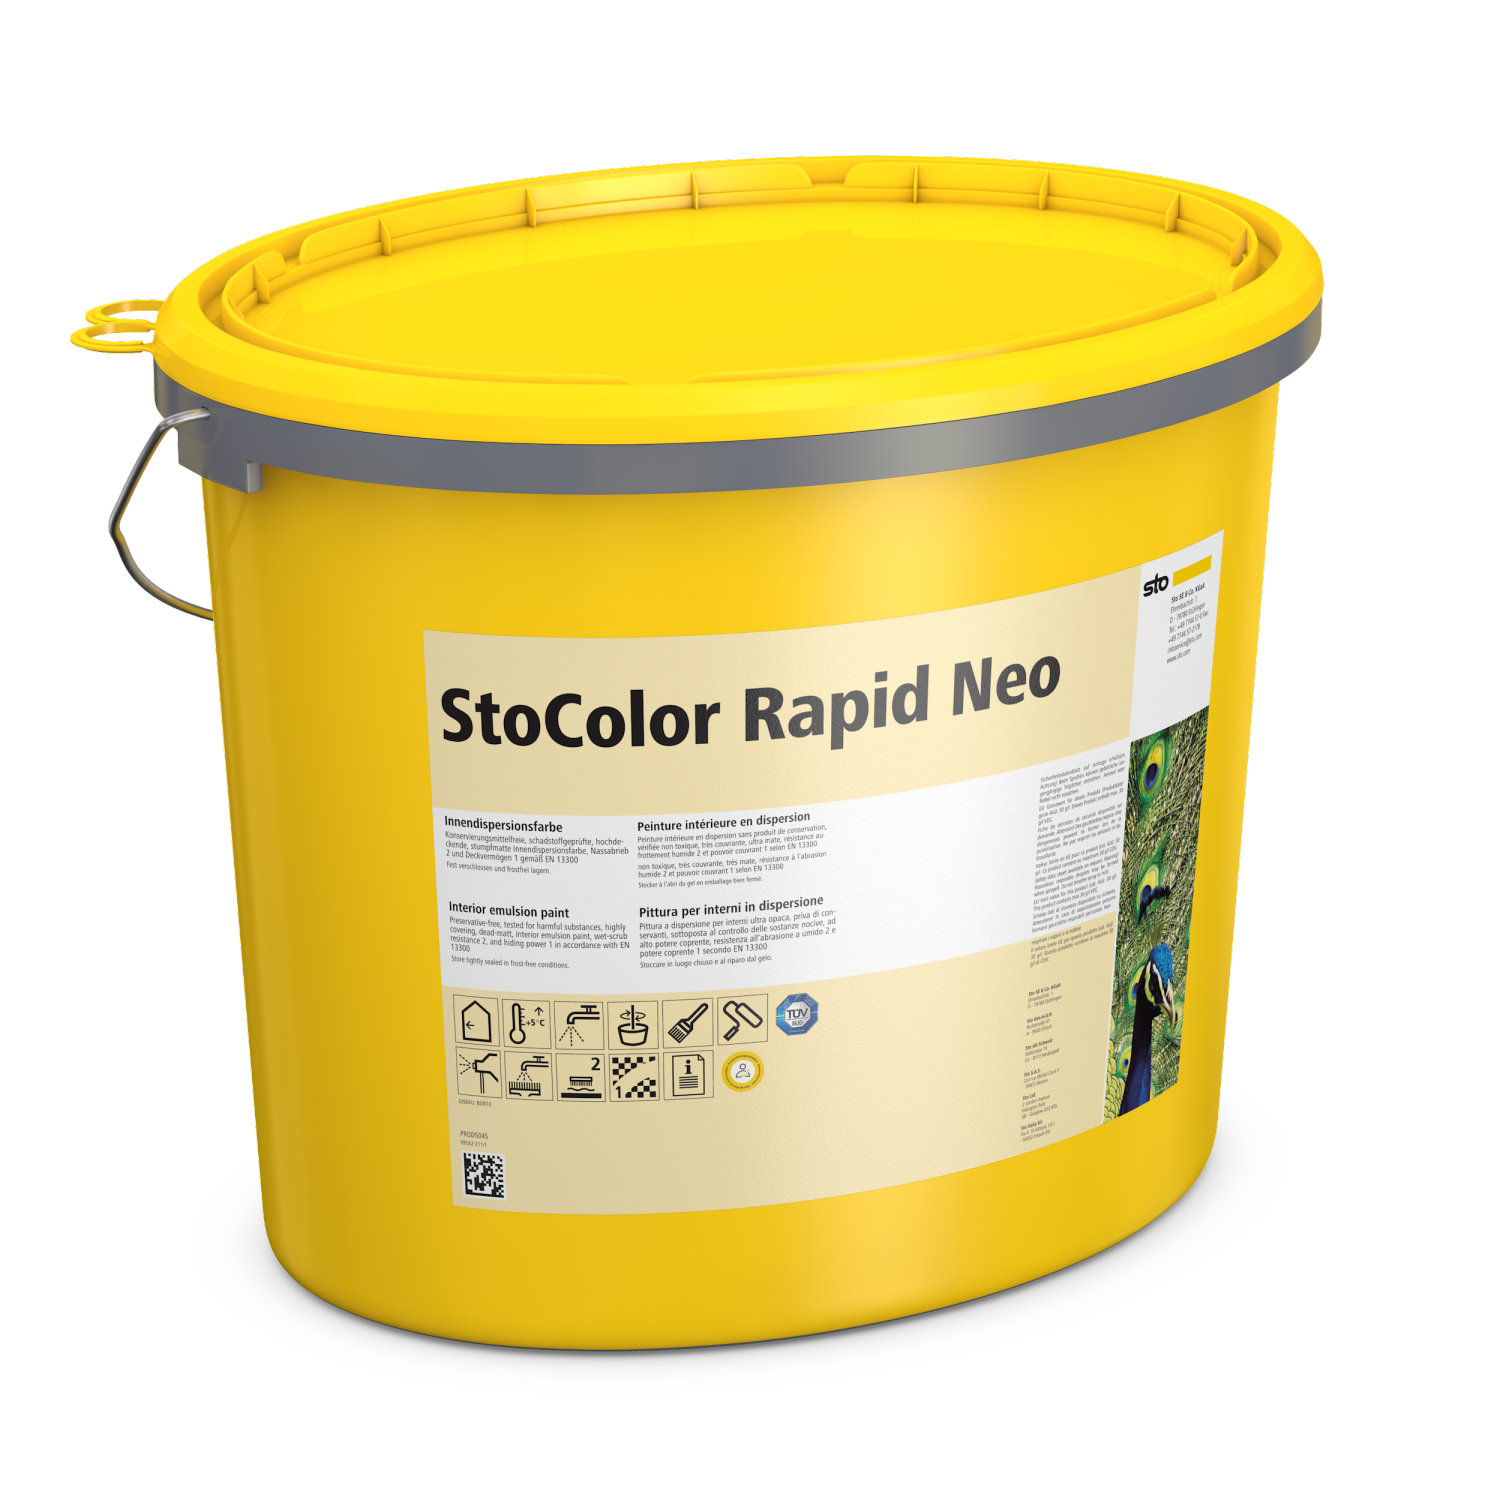 StoColor Rapid Neo